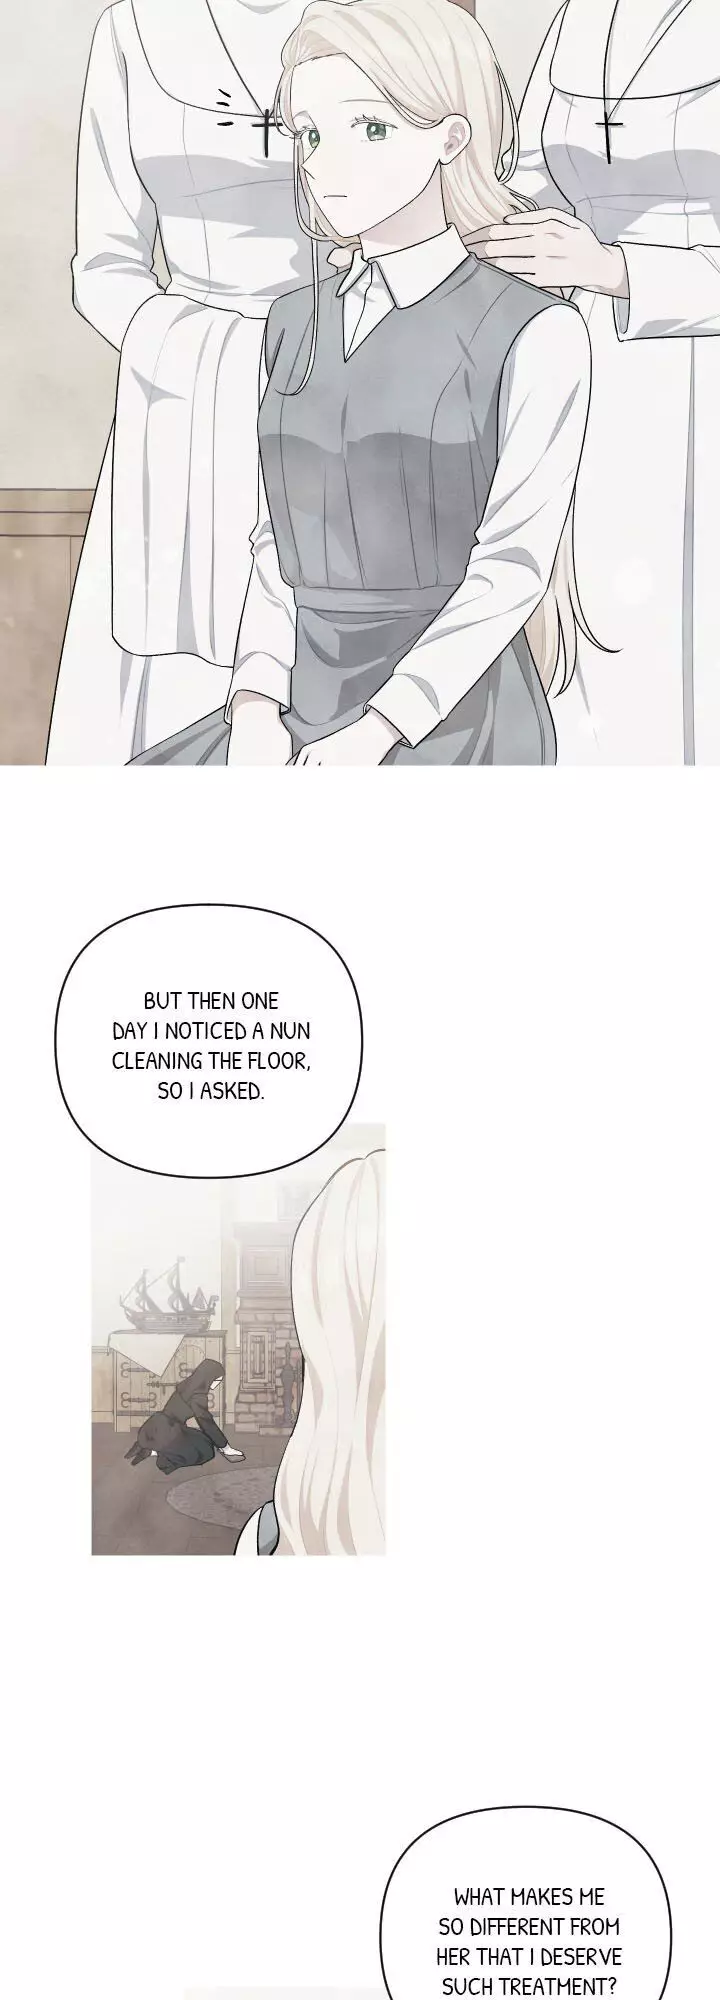 I Became A Maid In A Tl Novel - 59 page 5-1a3a0af3